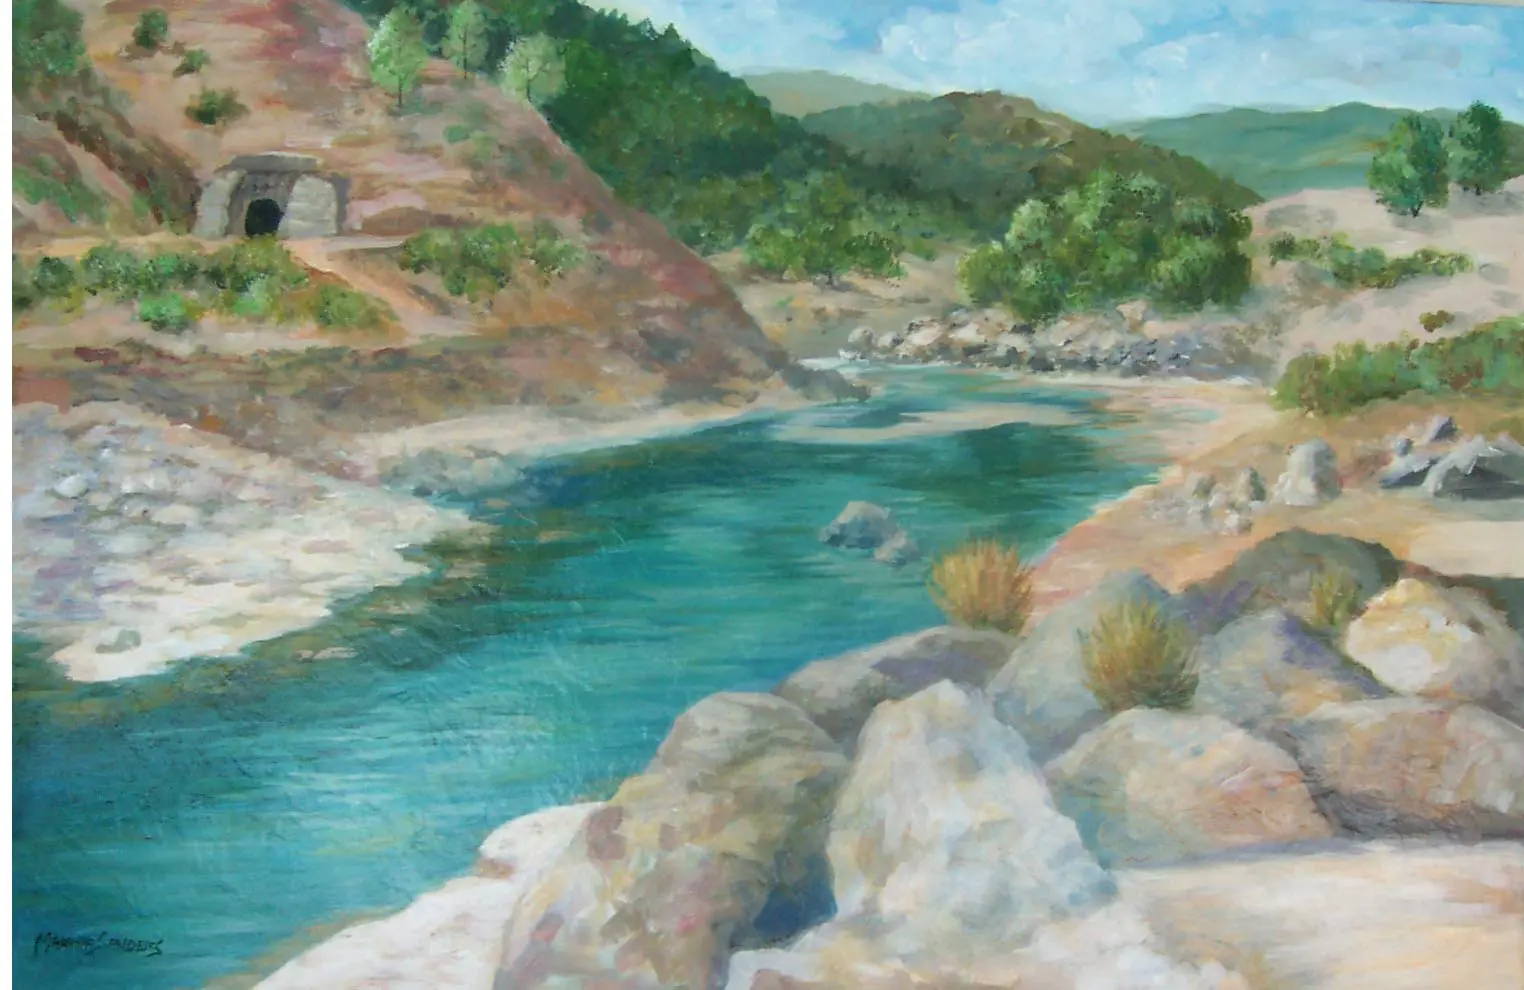 A painting of a river with rocks and trees